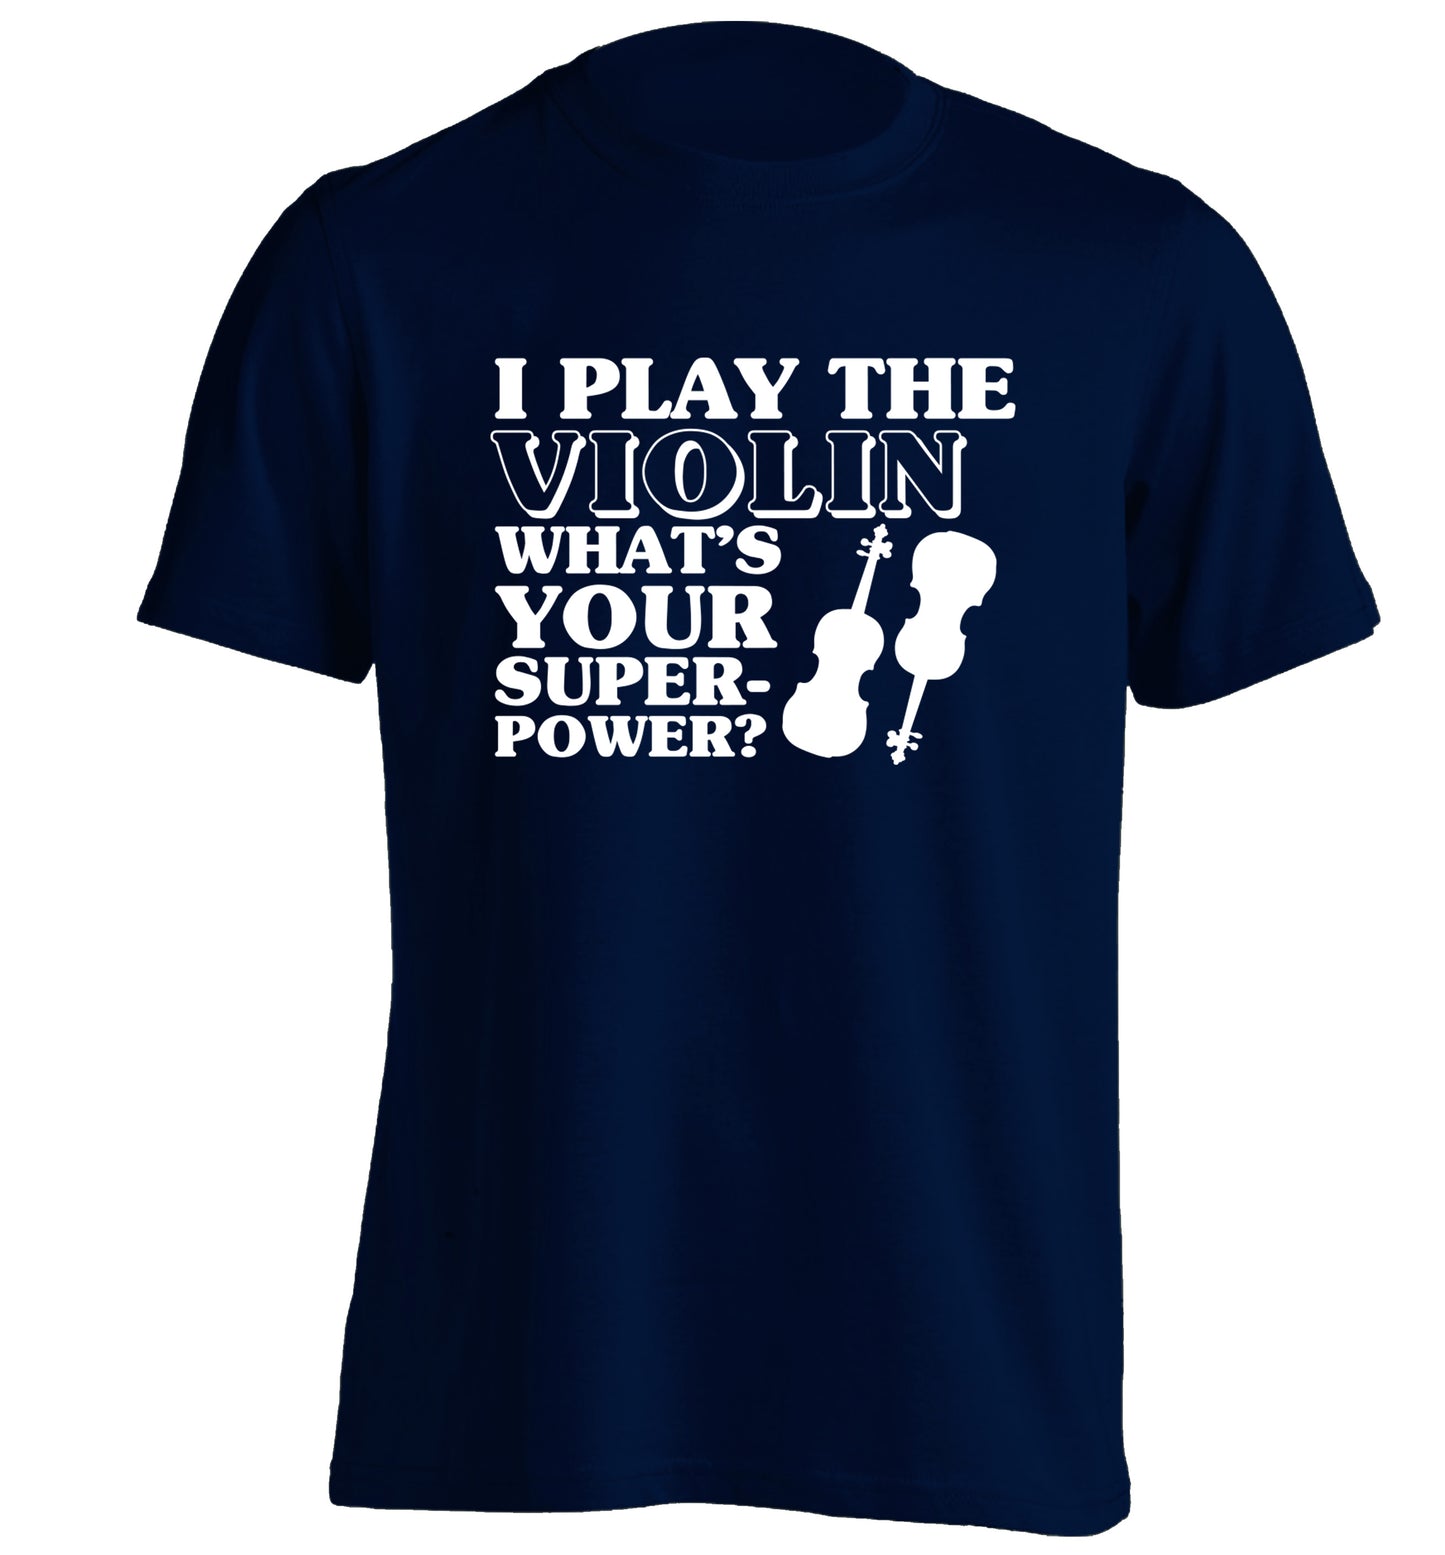 I Play Violin What's Your Superpower? adults unisex navy Tshirt 2XL